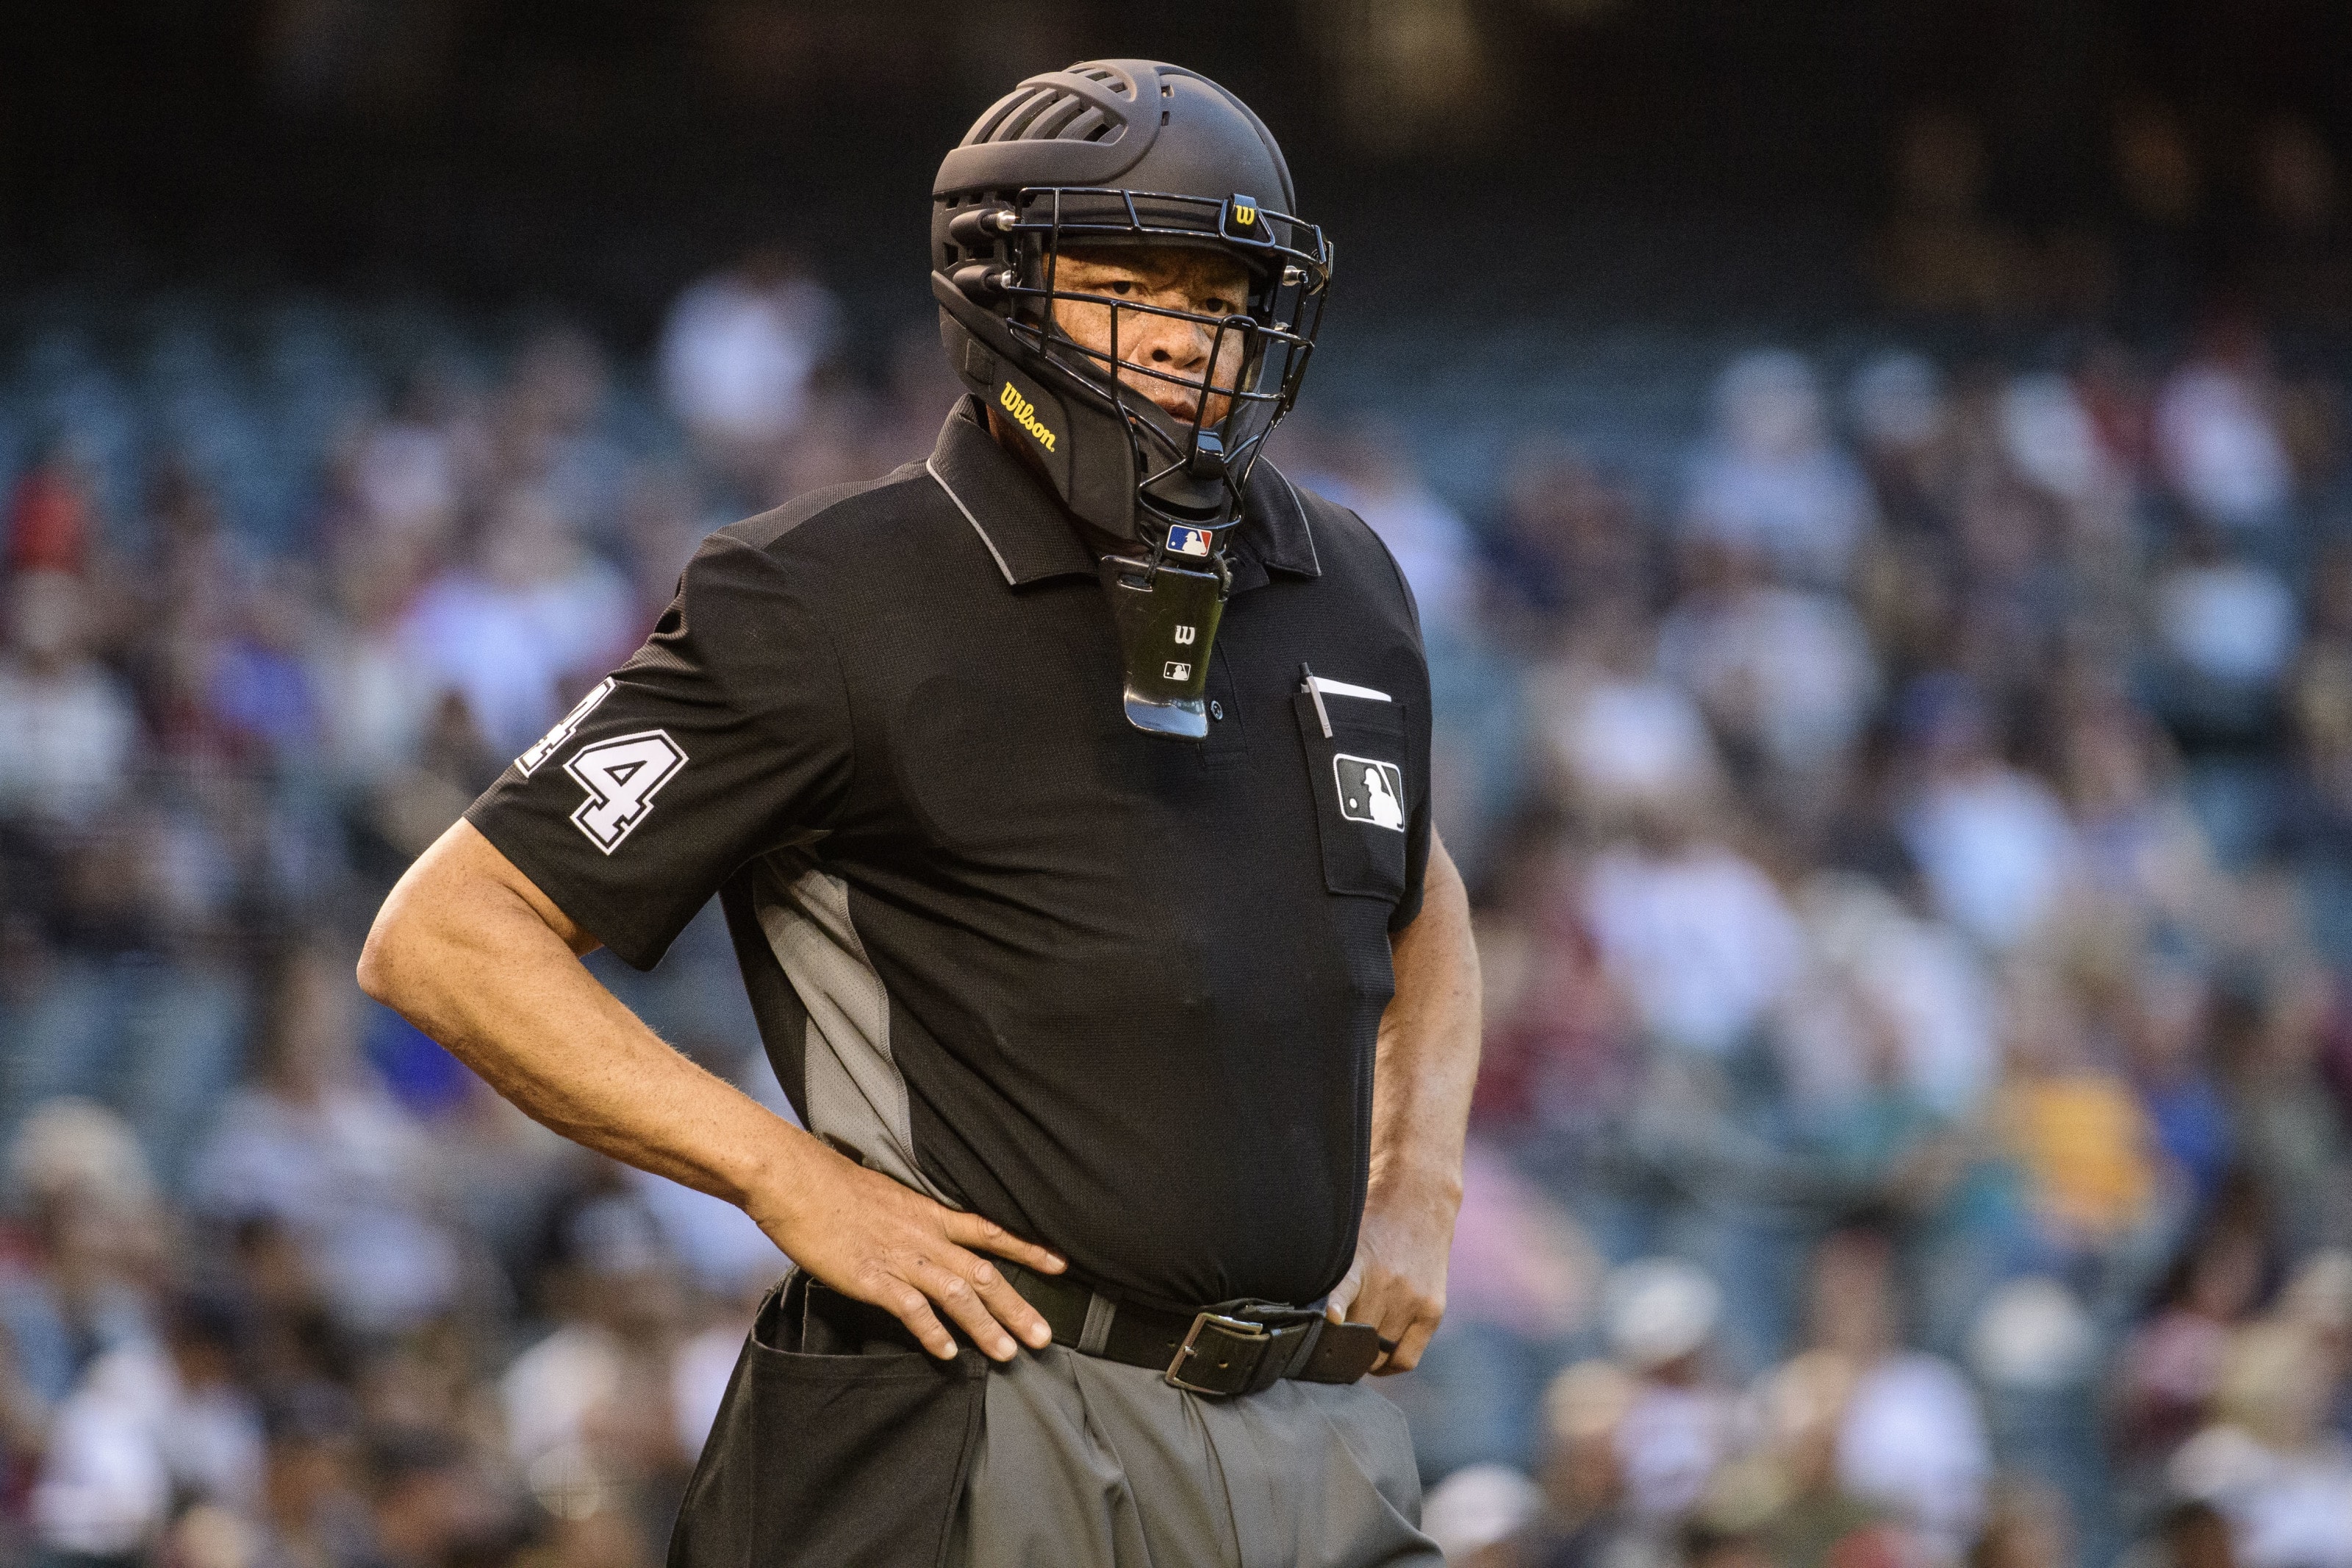 MLB Umpire Kerwin Danley the first black crew chief